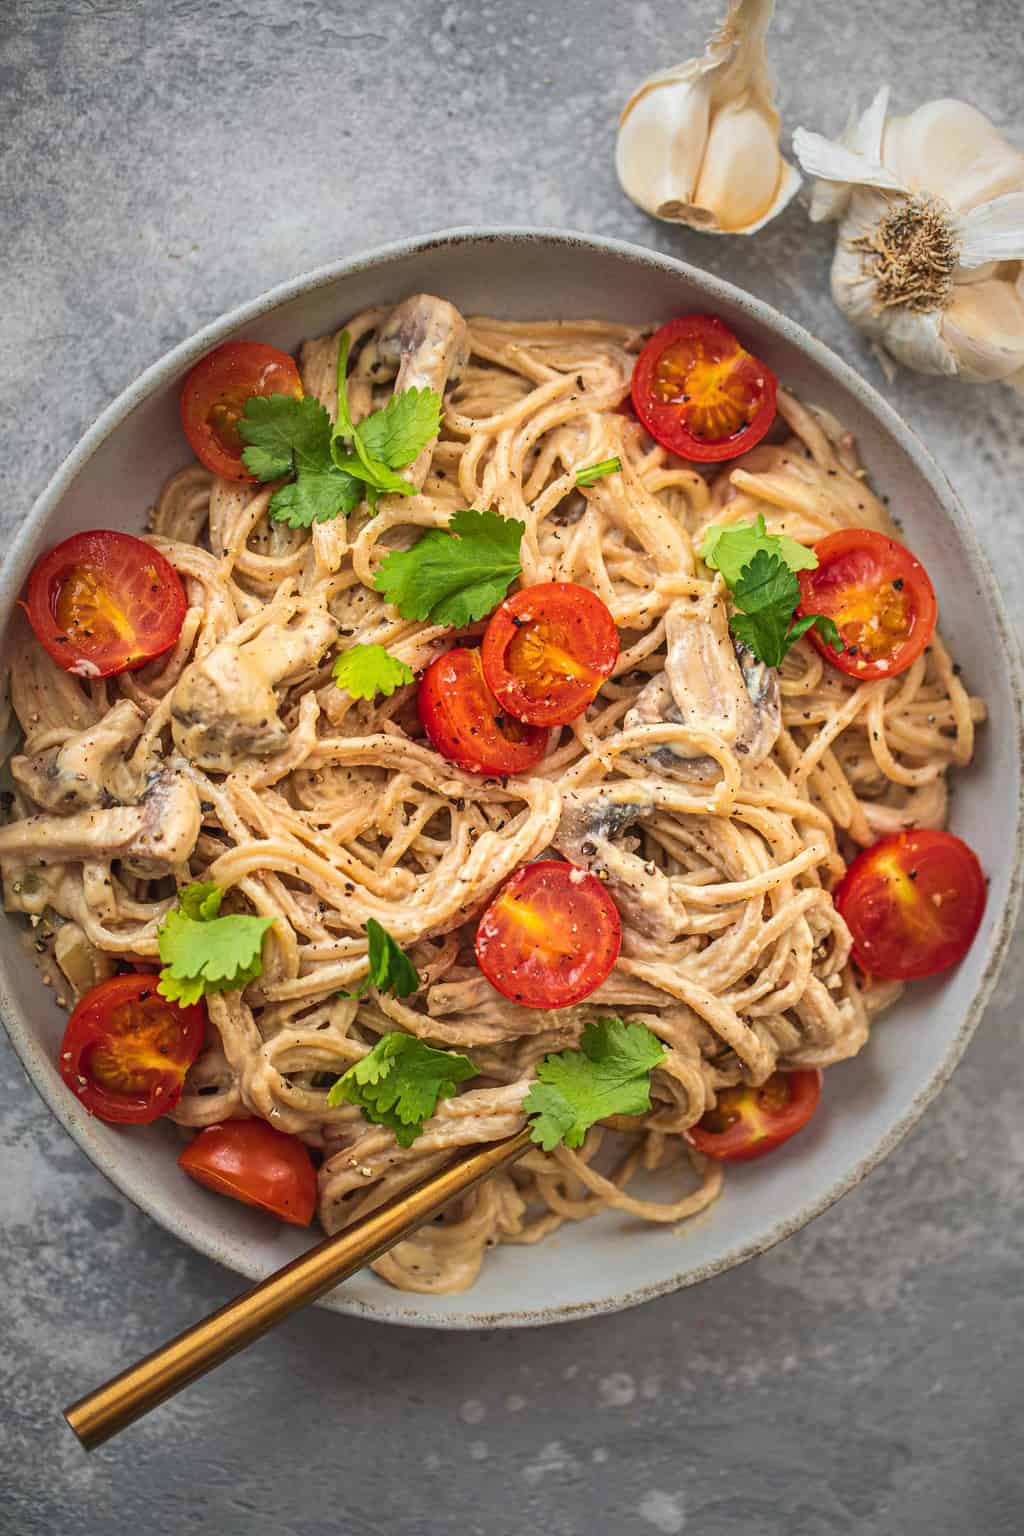 Plate of creamy vegan pasta with tomatoes